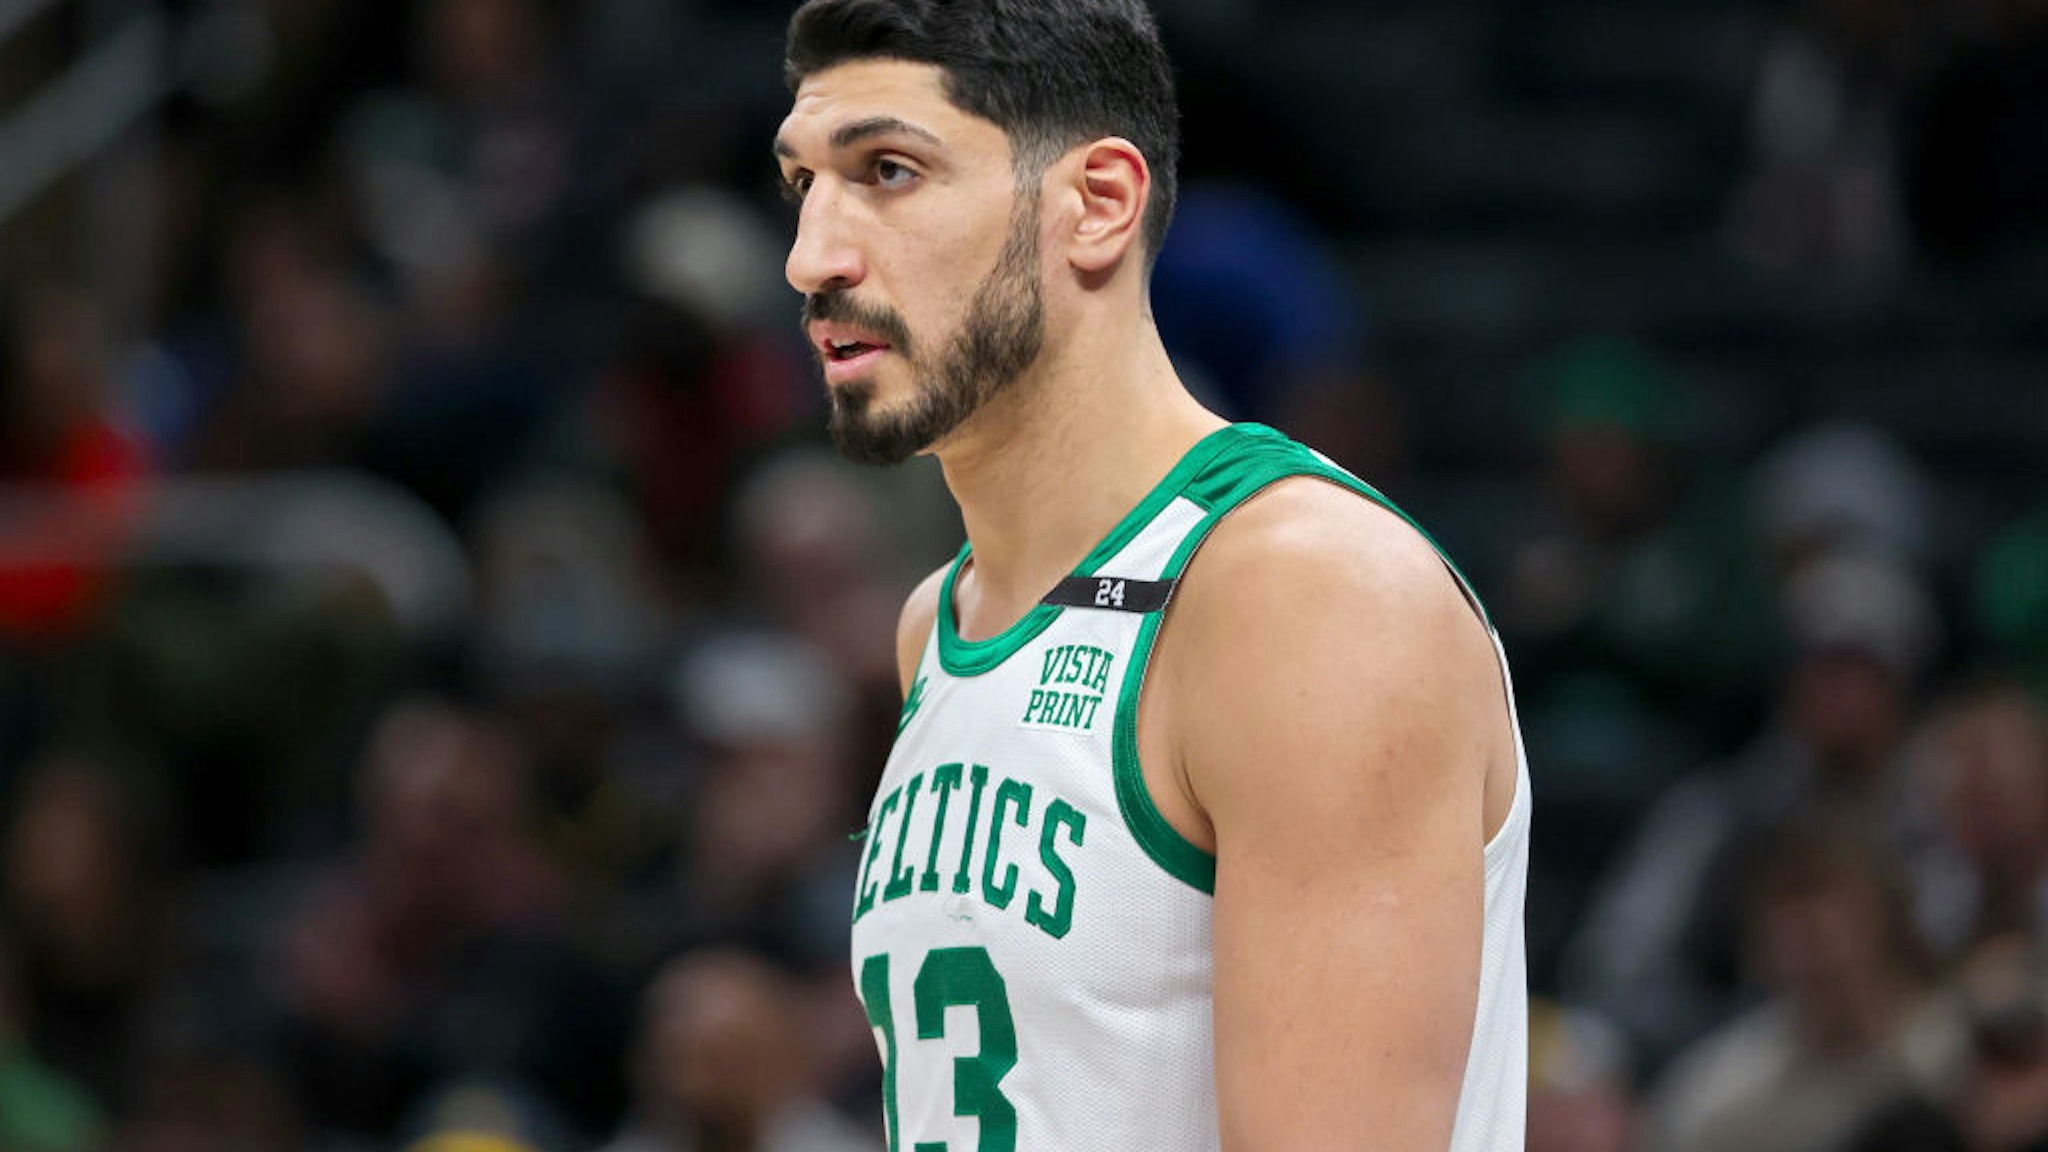 INDIANAPOLIS, INDIANA - JANUARY 12: Enes Freedom #13 of the Boston Celtics looks on in the third quarter against the Indiana Pacers at Gainbridge Fieldhouse on January 12, 2022 in Indianapolis, Indiana. NOTE TO USER: User expressly acknowledges and agrees that, by downloading and or using this Photograph, user is consenting to the terms and conditions of the Getty Images License Agreement. (Photo by Dylan Buell/Getty Images)